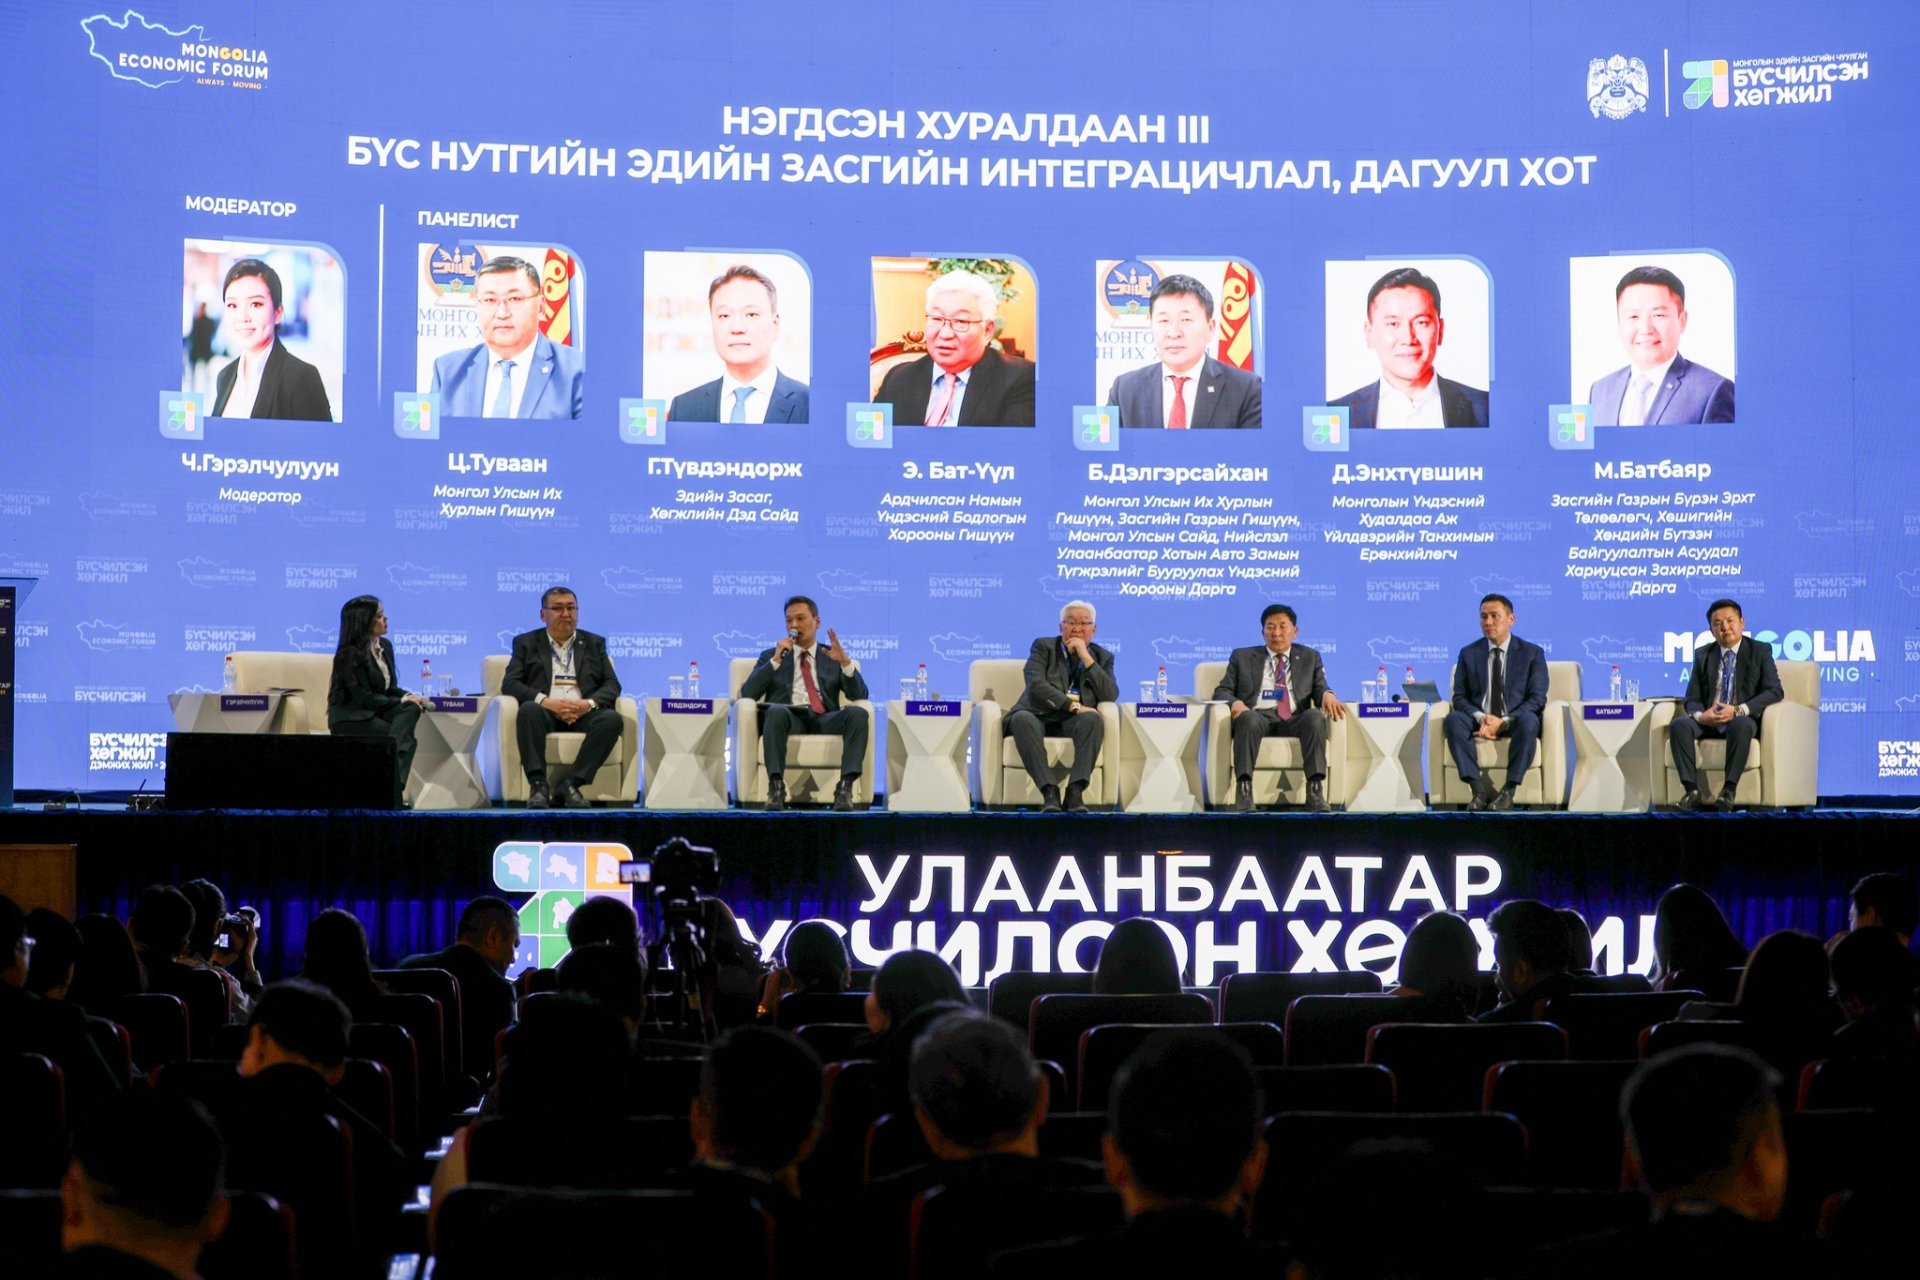 M. Batbayar: New Zuunmod city will become a city providing job in this region